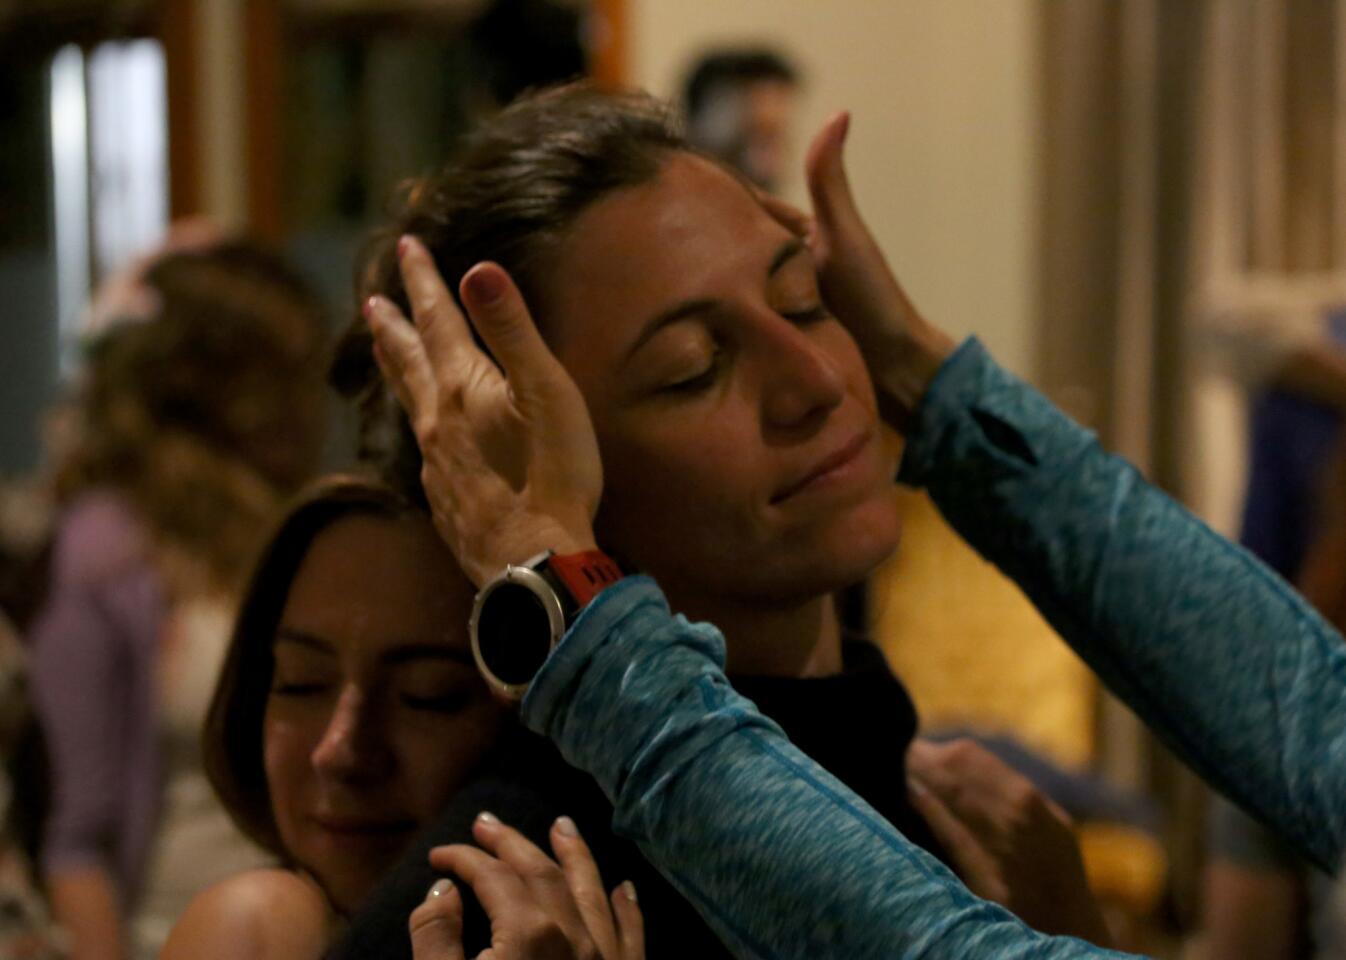 Carly Pepin get a hands-on experience during the Magic of Human Connection playshop at the Conscious Family Dinner event in North Hollywood on Oct. 26, 2016.